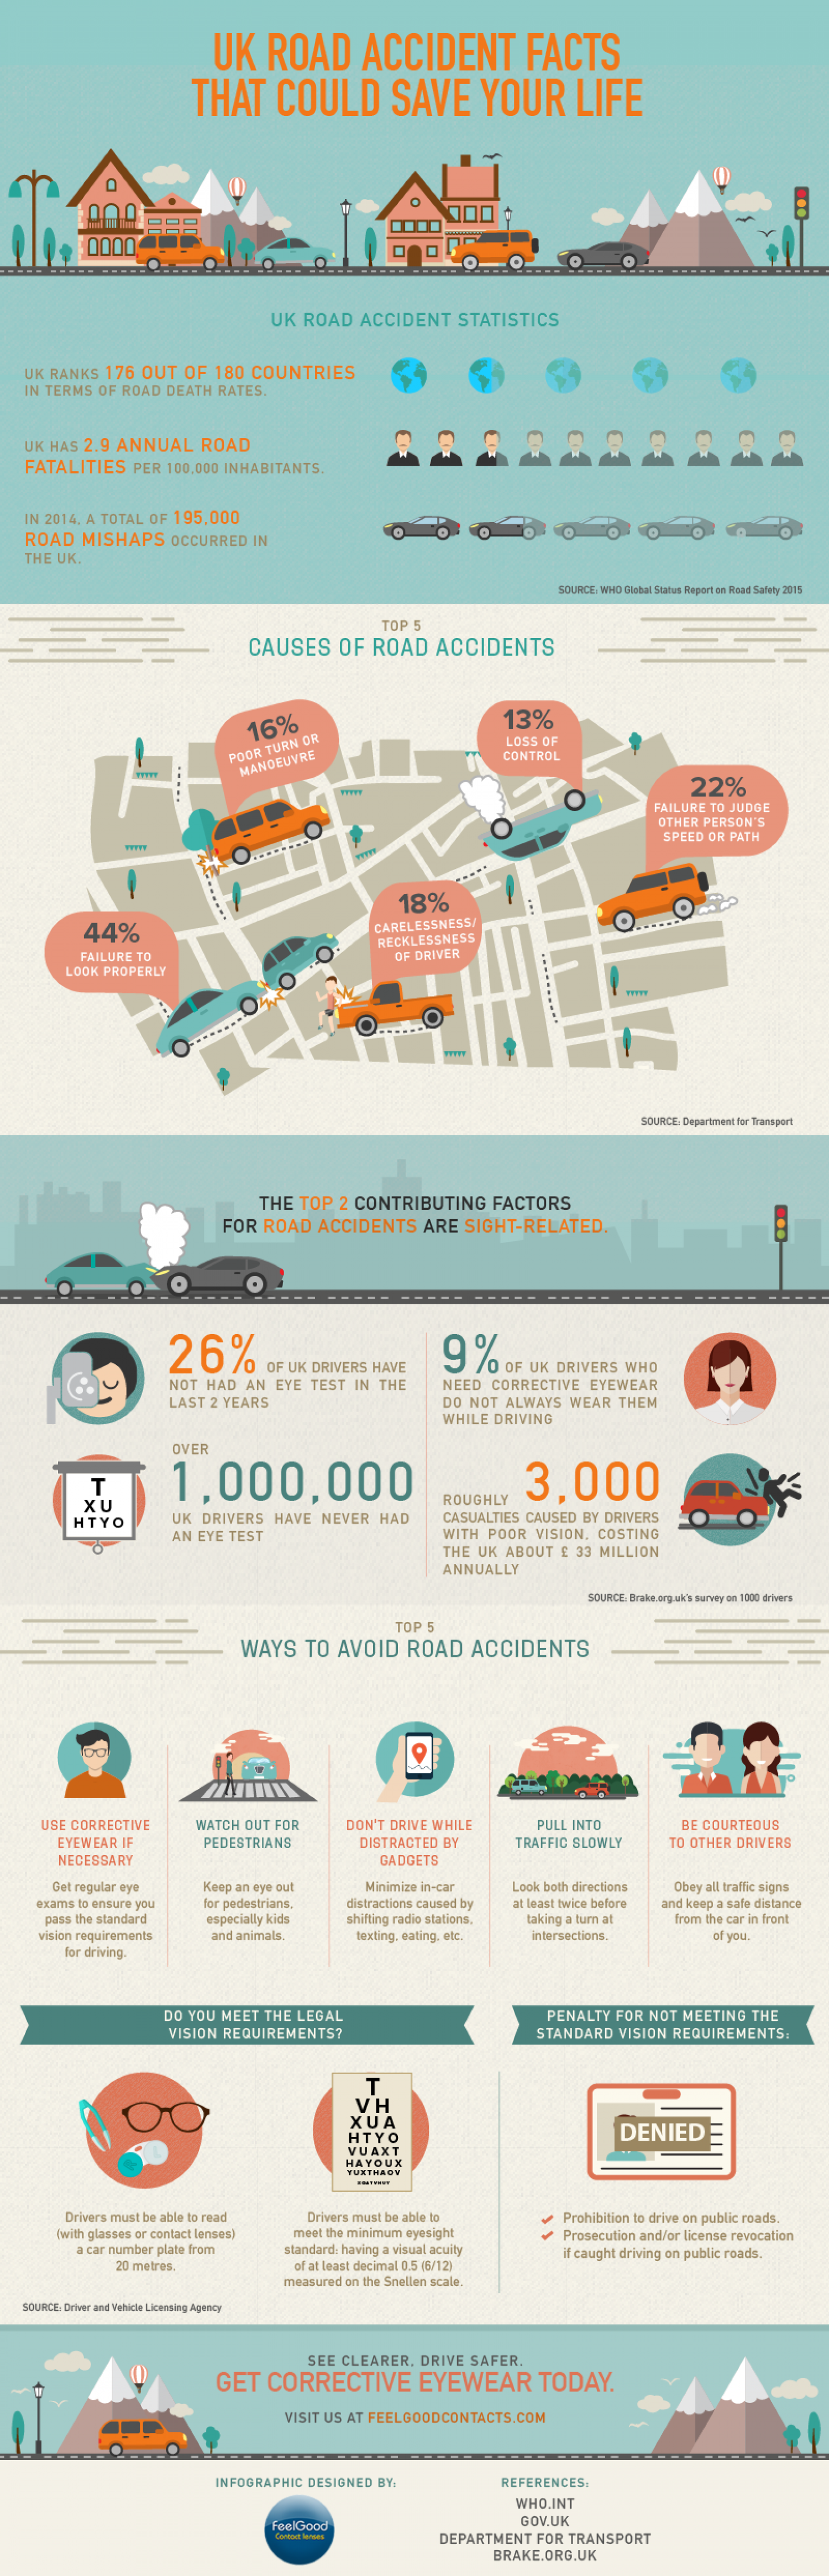 Top Causes of Road Accidents in the UK Infographic